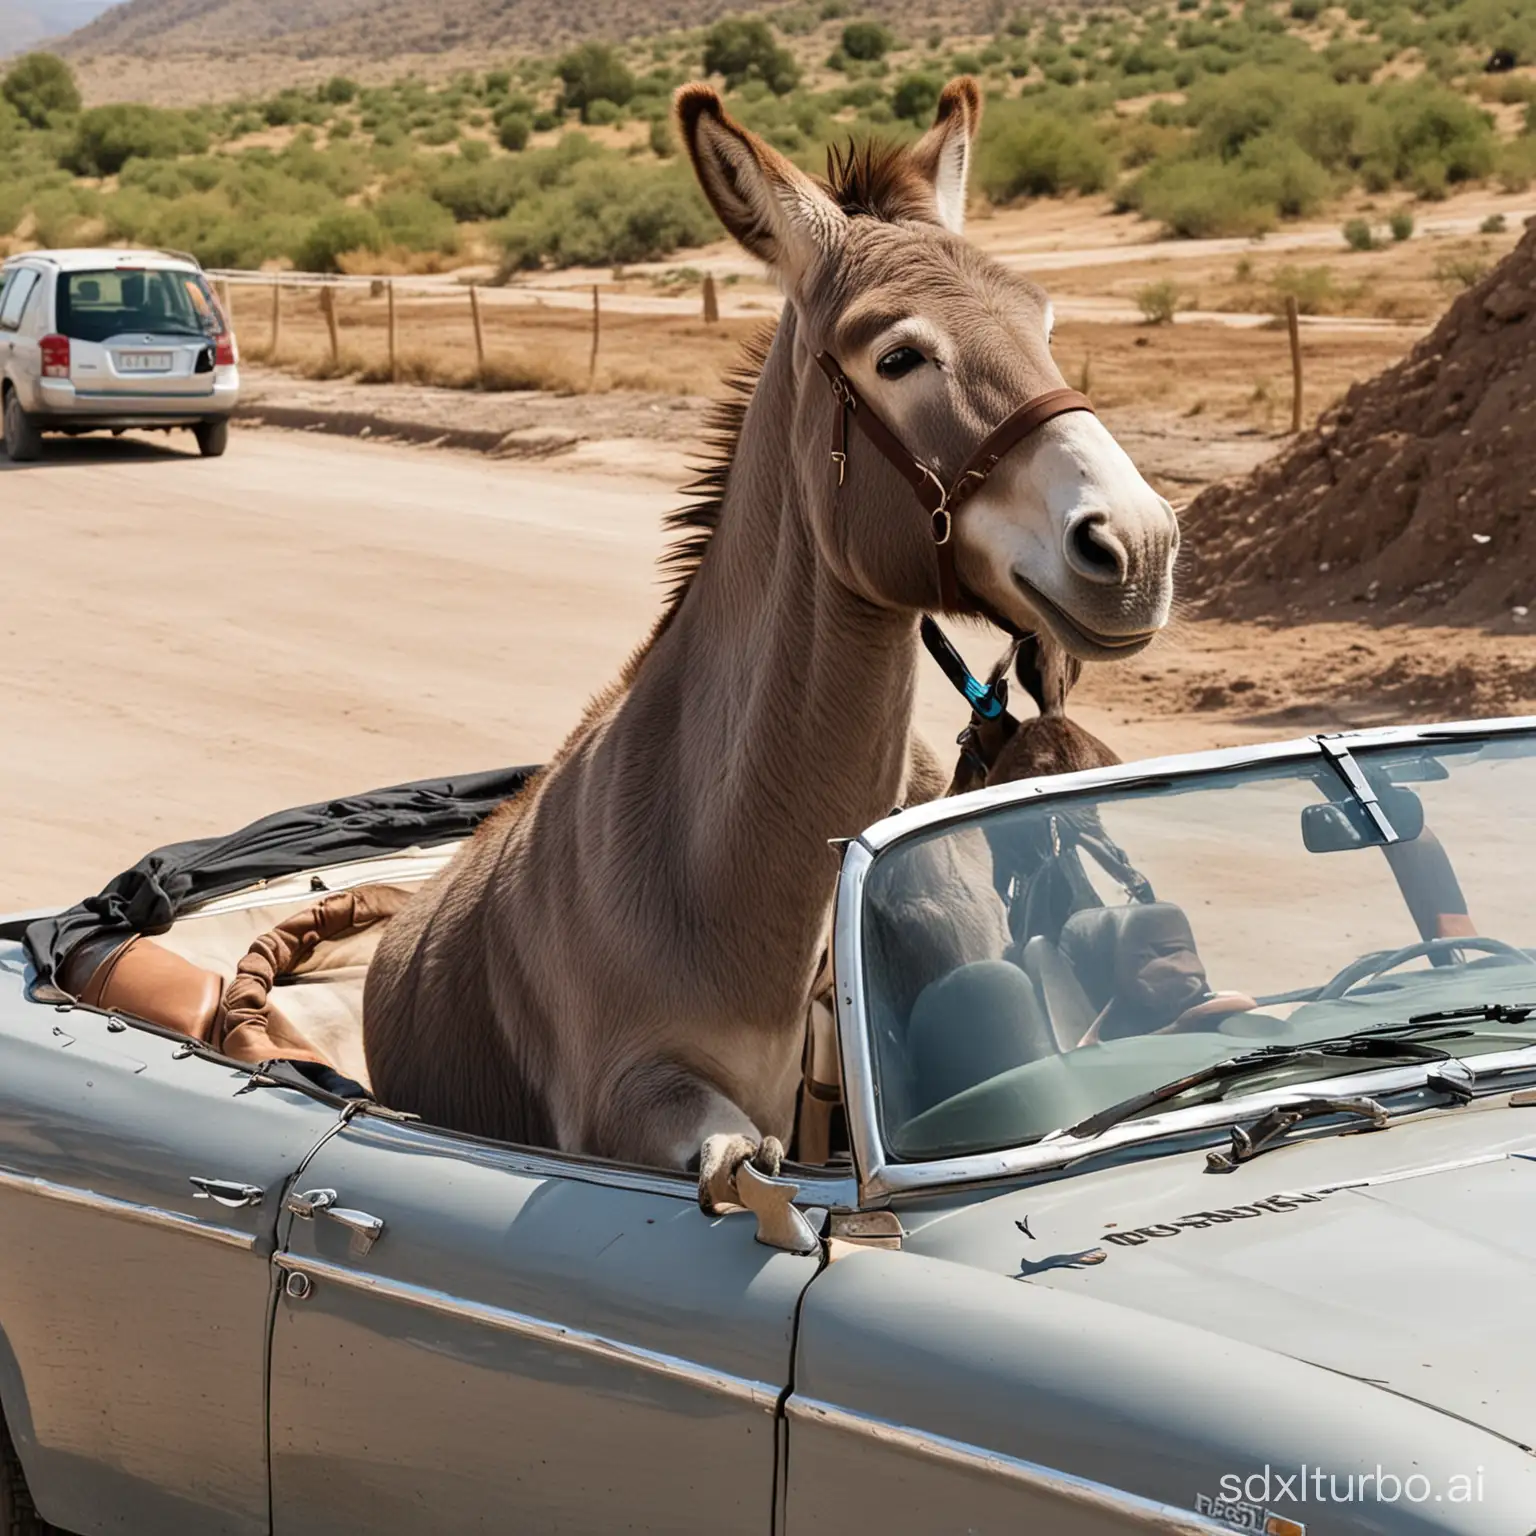 Donkey-Driving-Car-Humorous-Animal-Illustration-in-a-Modern-Setting